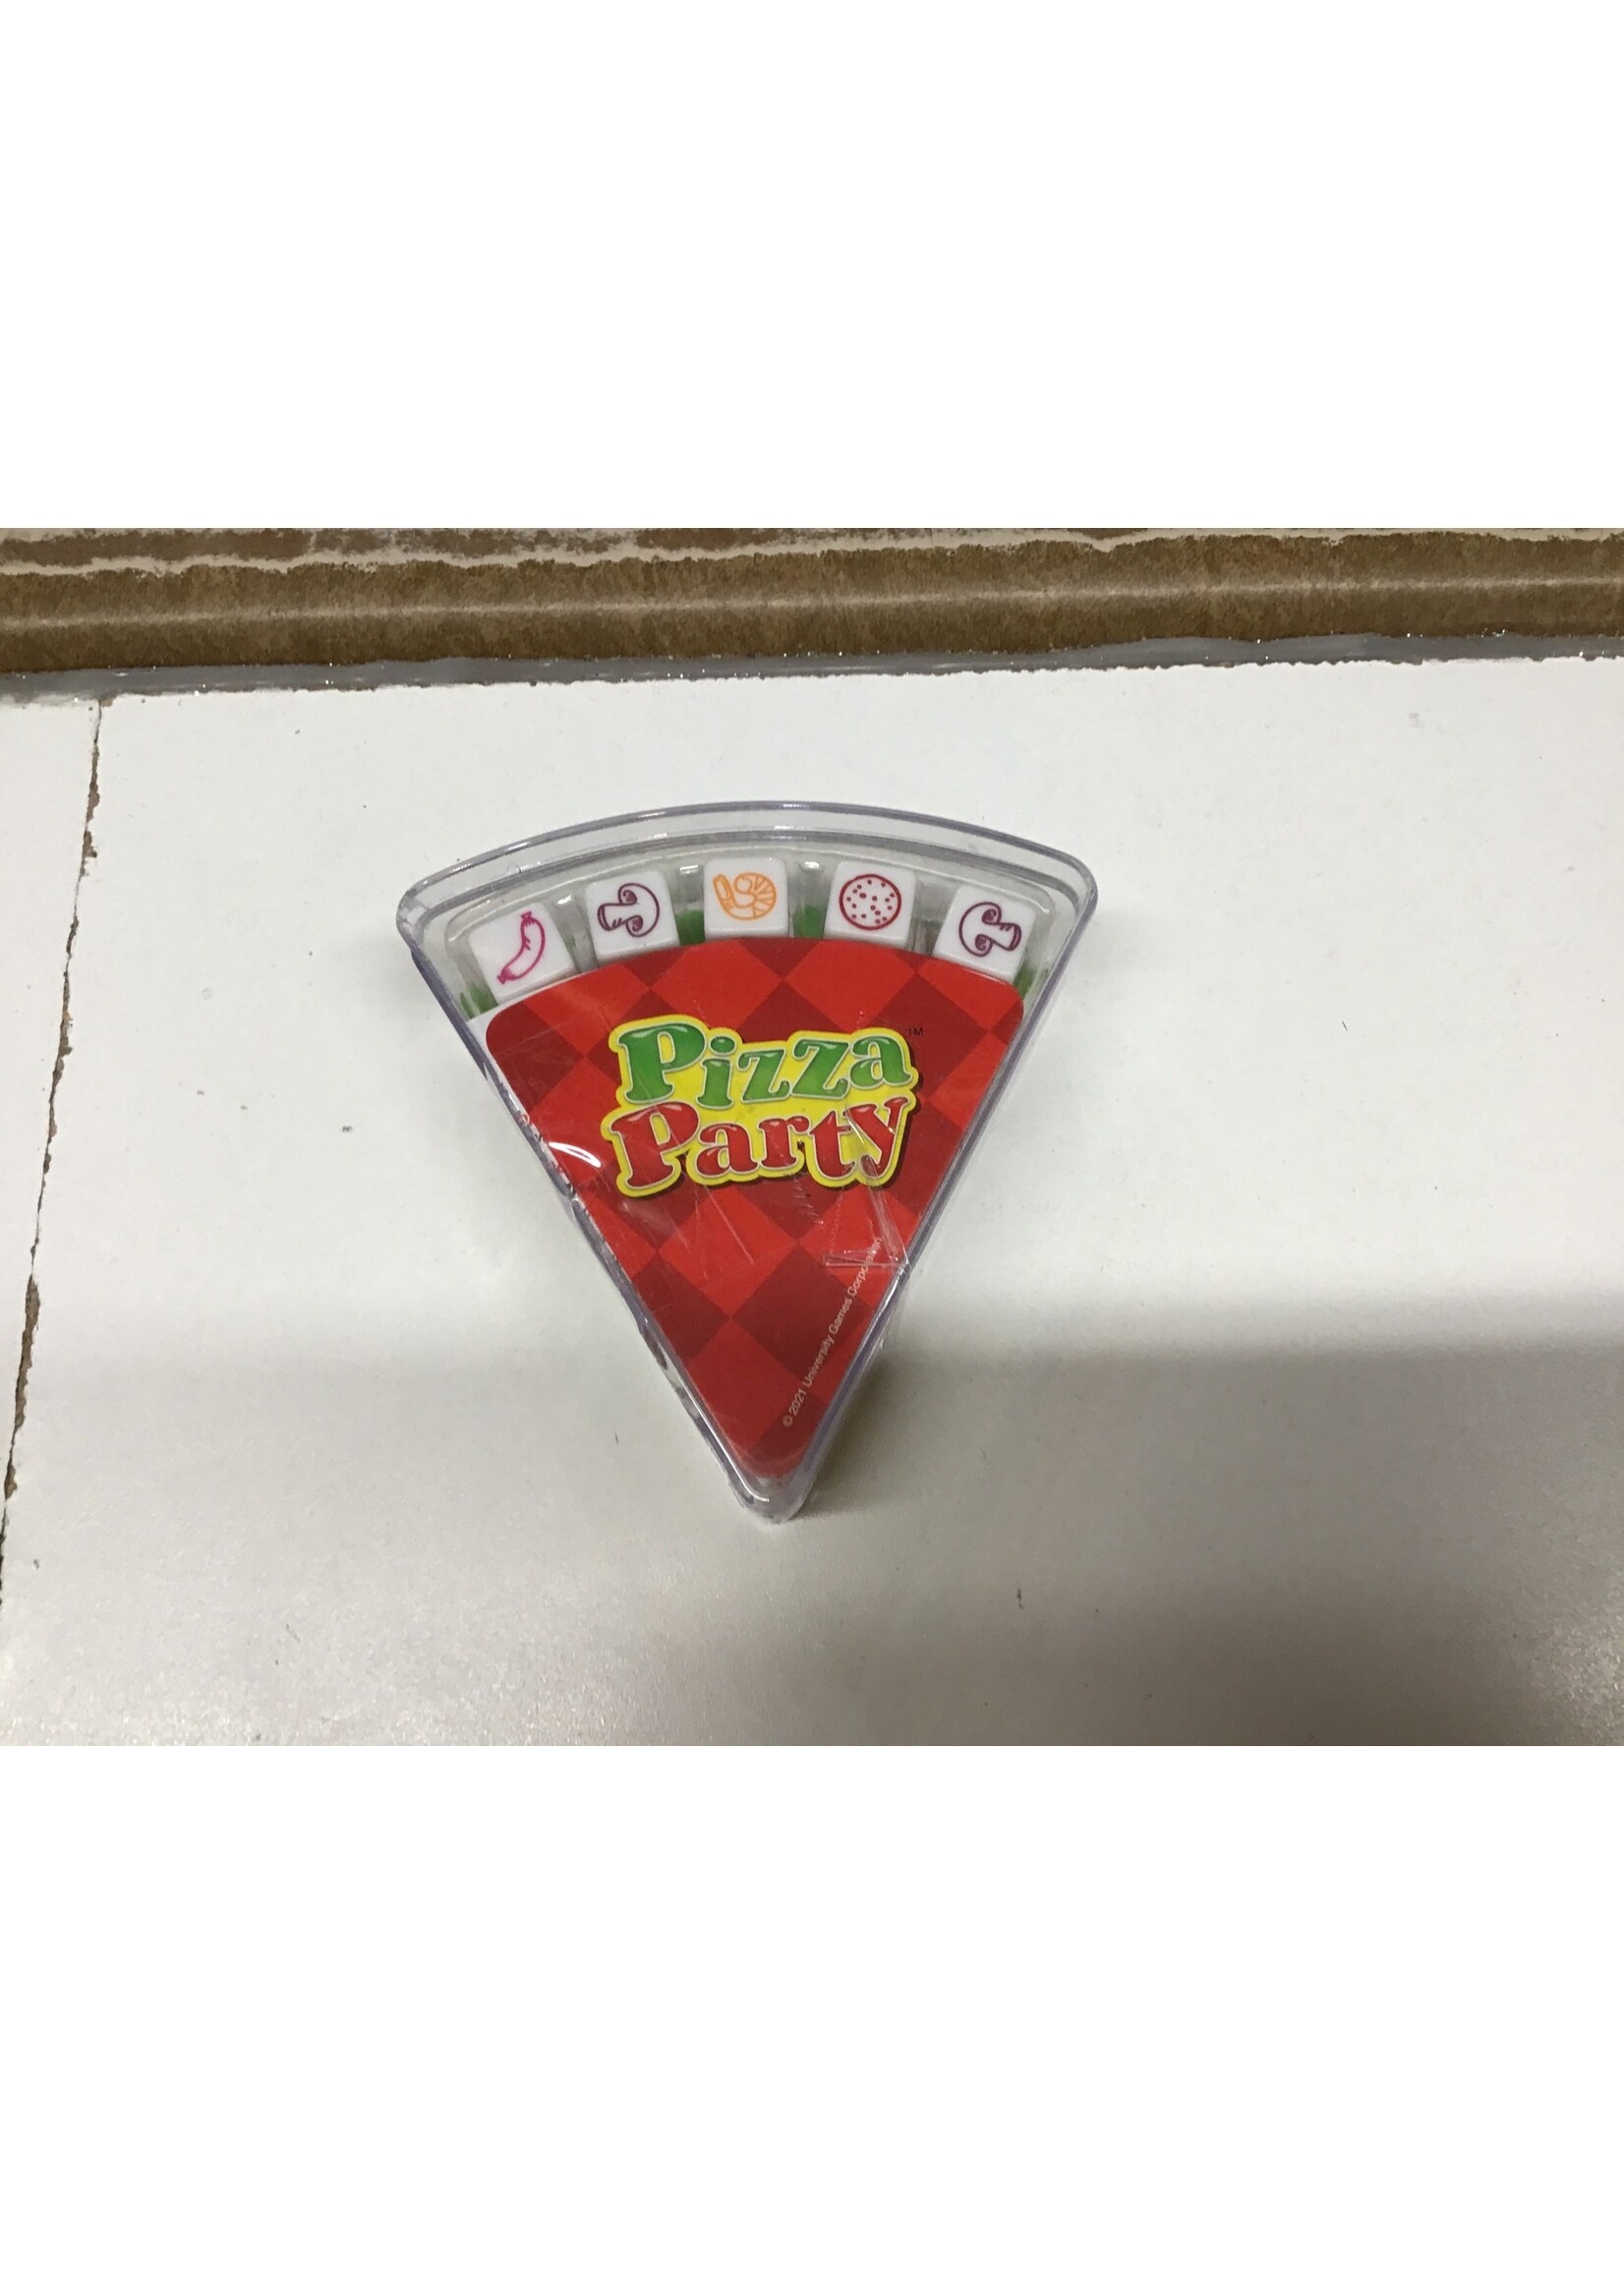 Pizza Party Card Game case broke